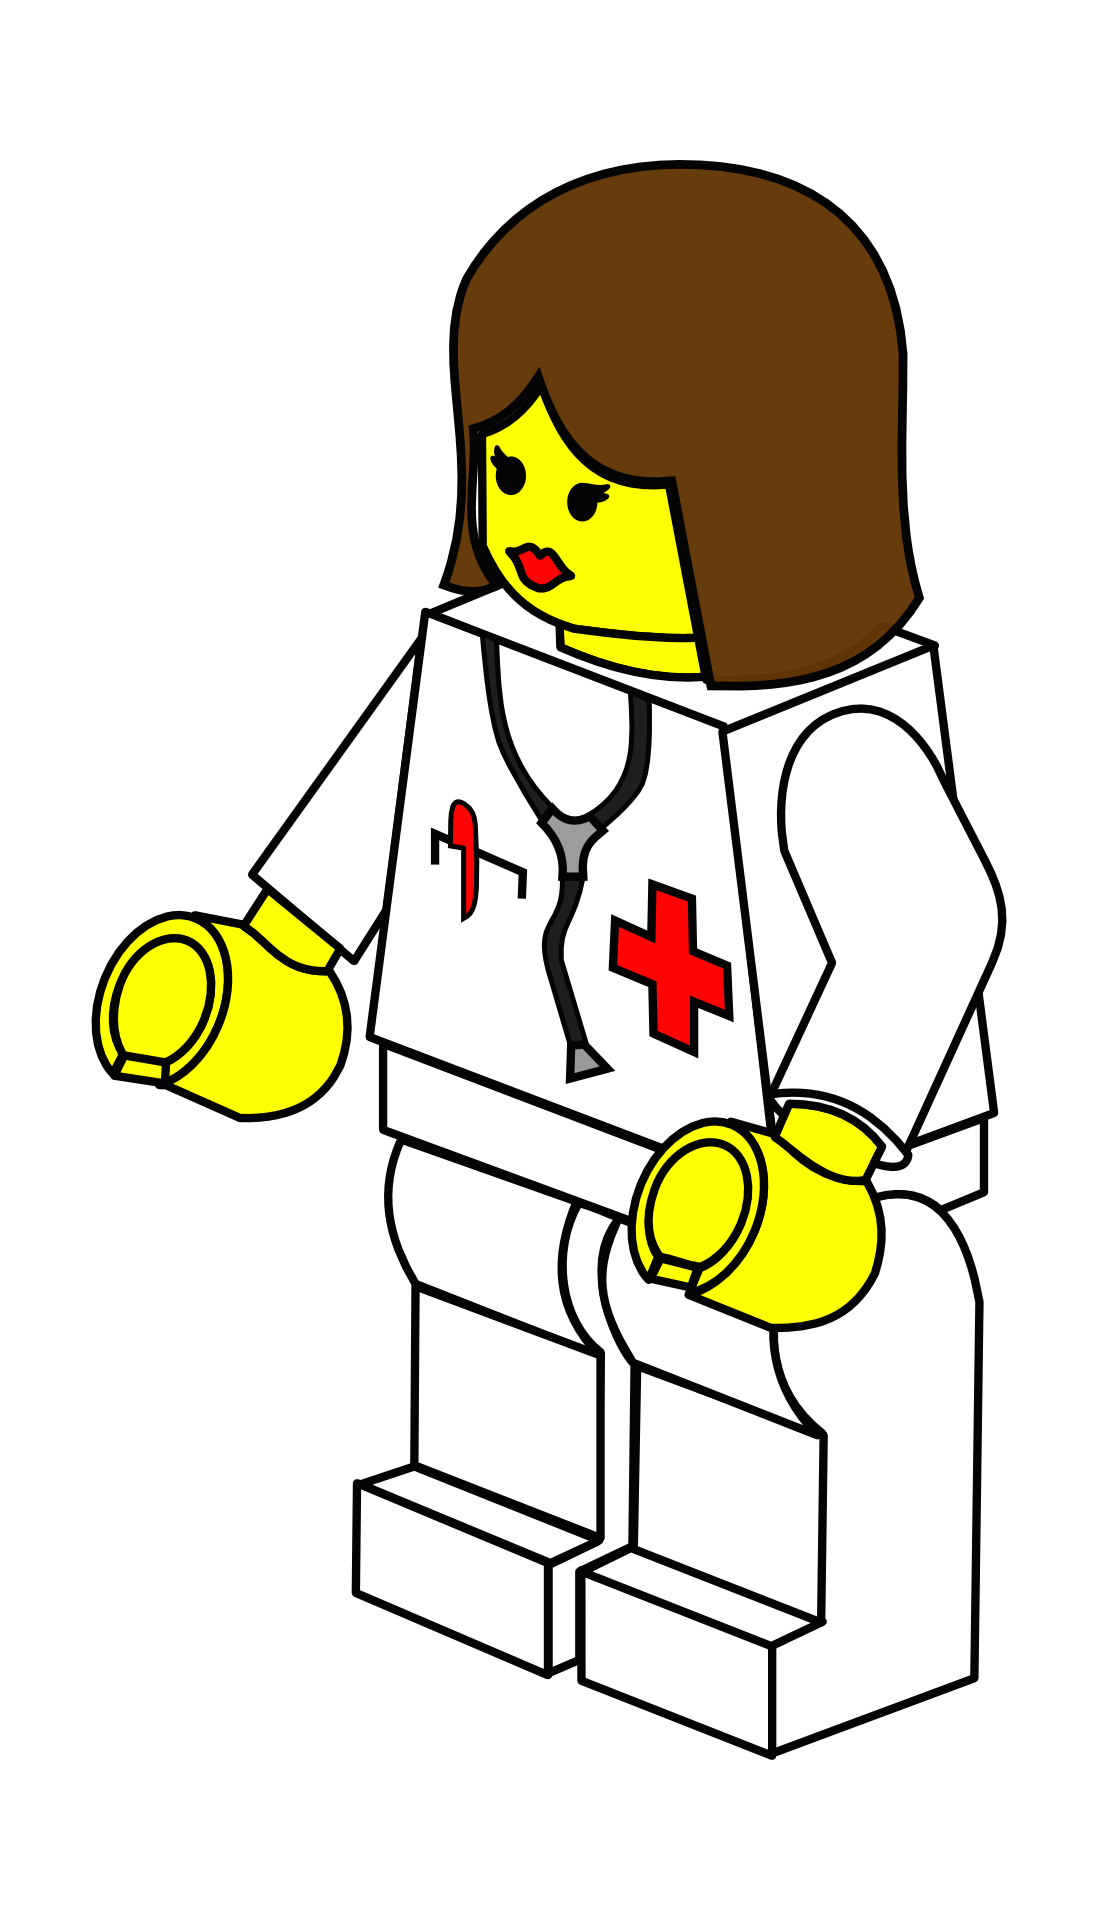 Minifigure at getdrawings com. Lego clipart worker